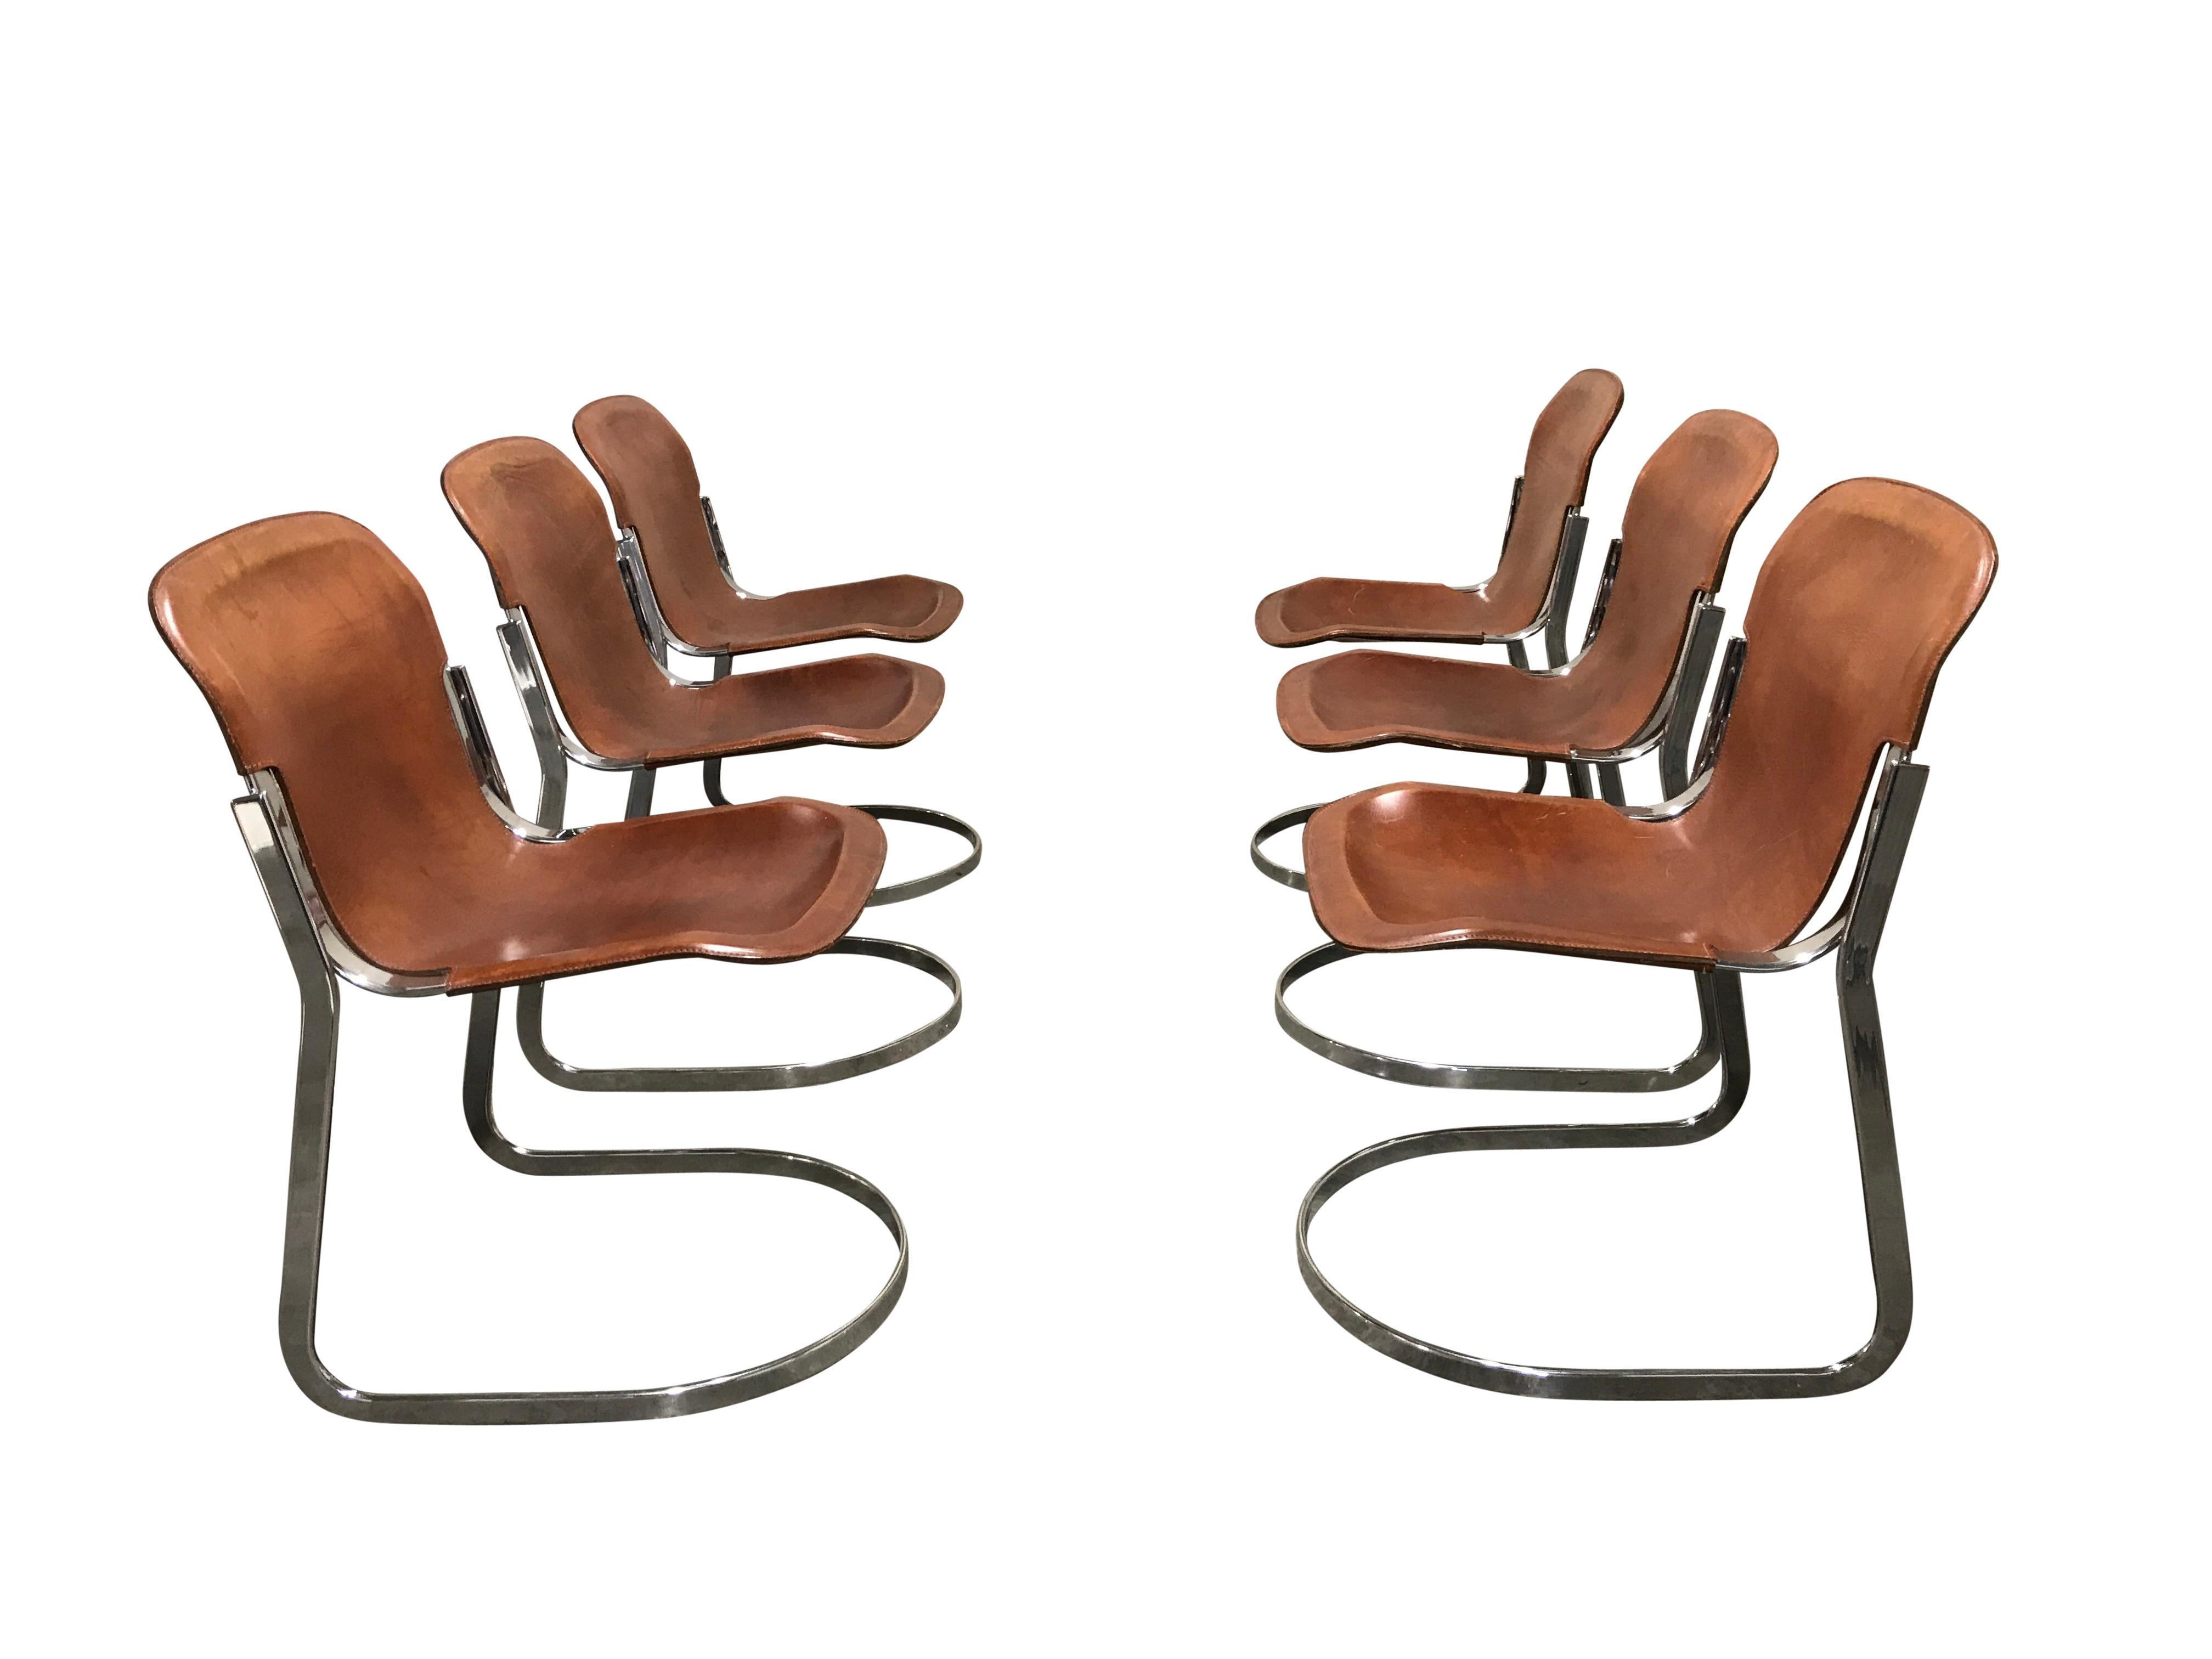 Set of 6 dining chairs designed by Willy Rizzo for Cidue (model C2).

The chairs have a beautifully shaped chrome frame and come with the original brown leather seats.

The chairs are stackable.

Very good condition, no discoloration, no